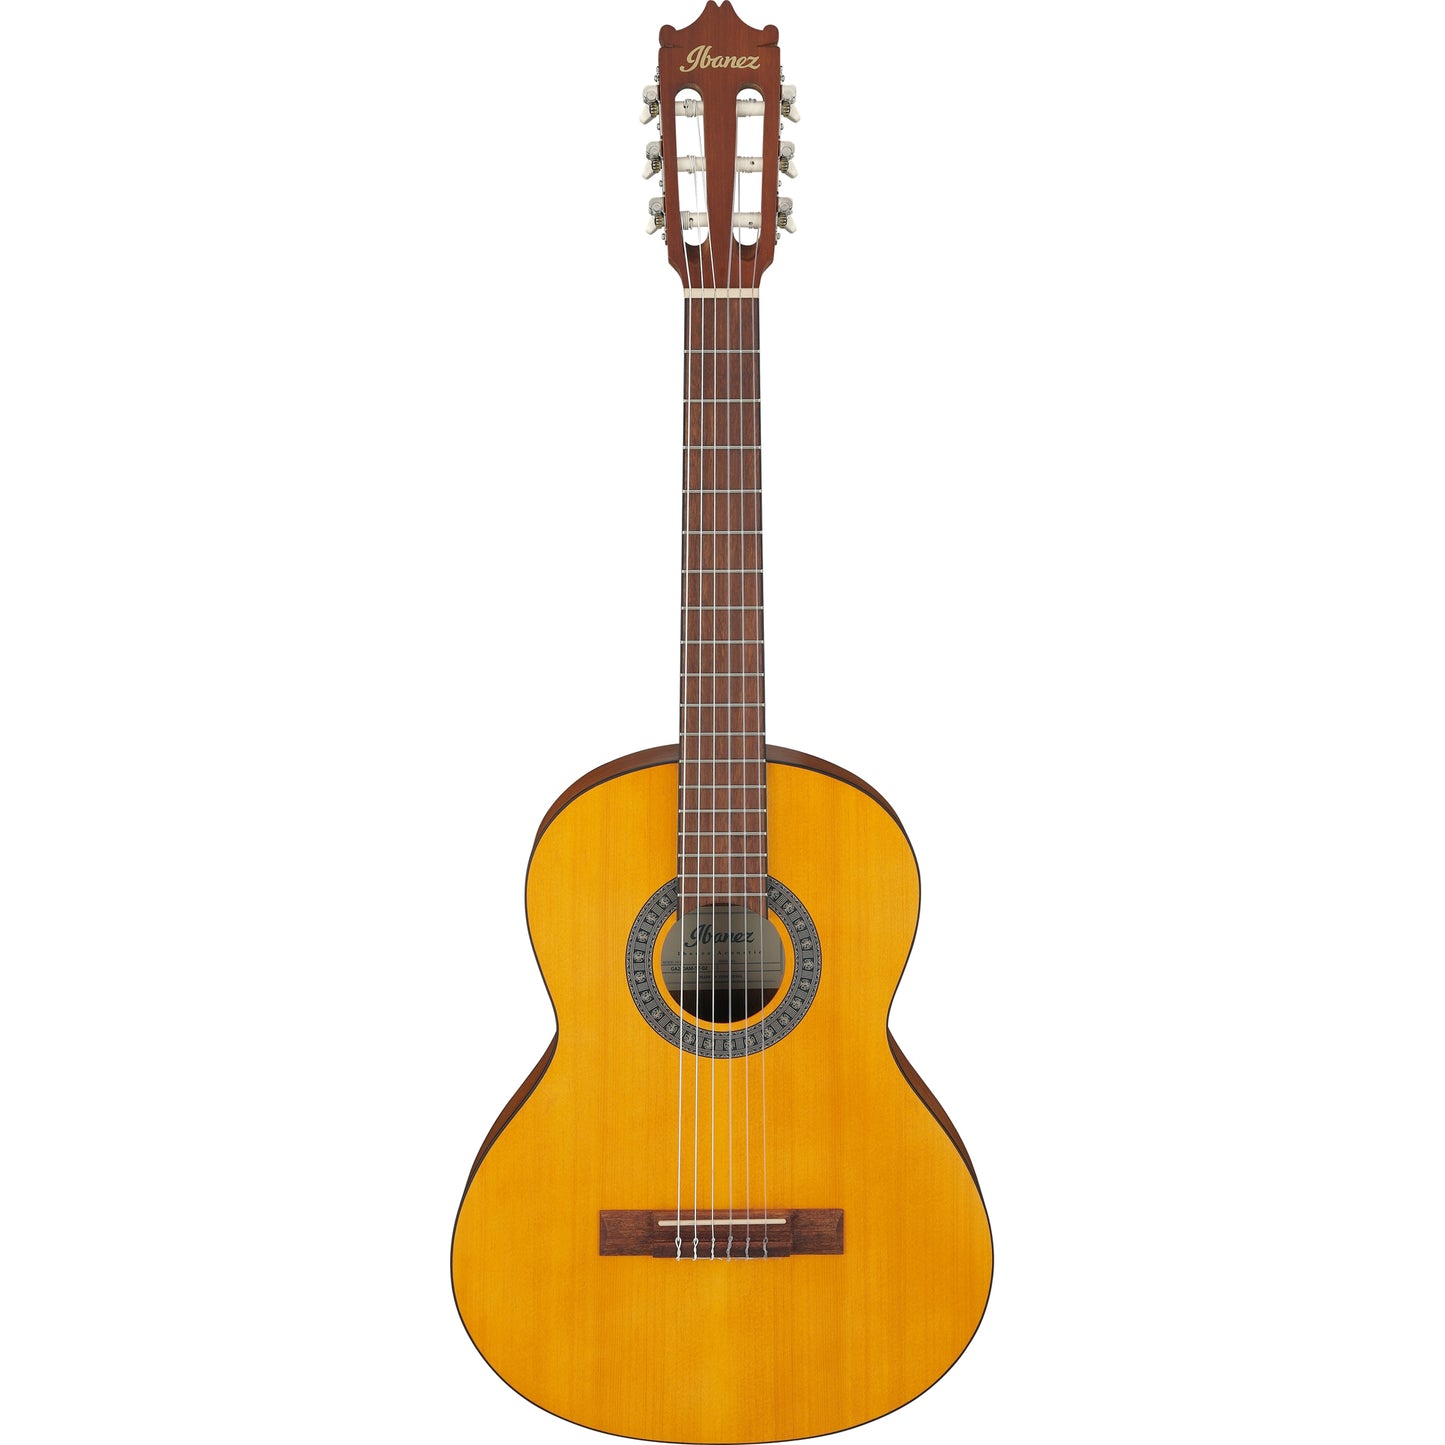 Ibanez GA2 6 String Classic 3/4 Size Acoustic Guitar - Open Pore Amber